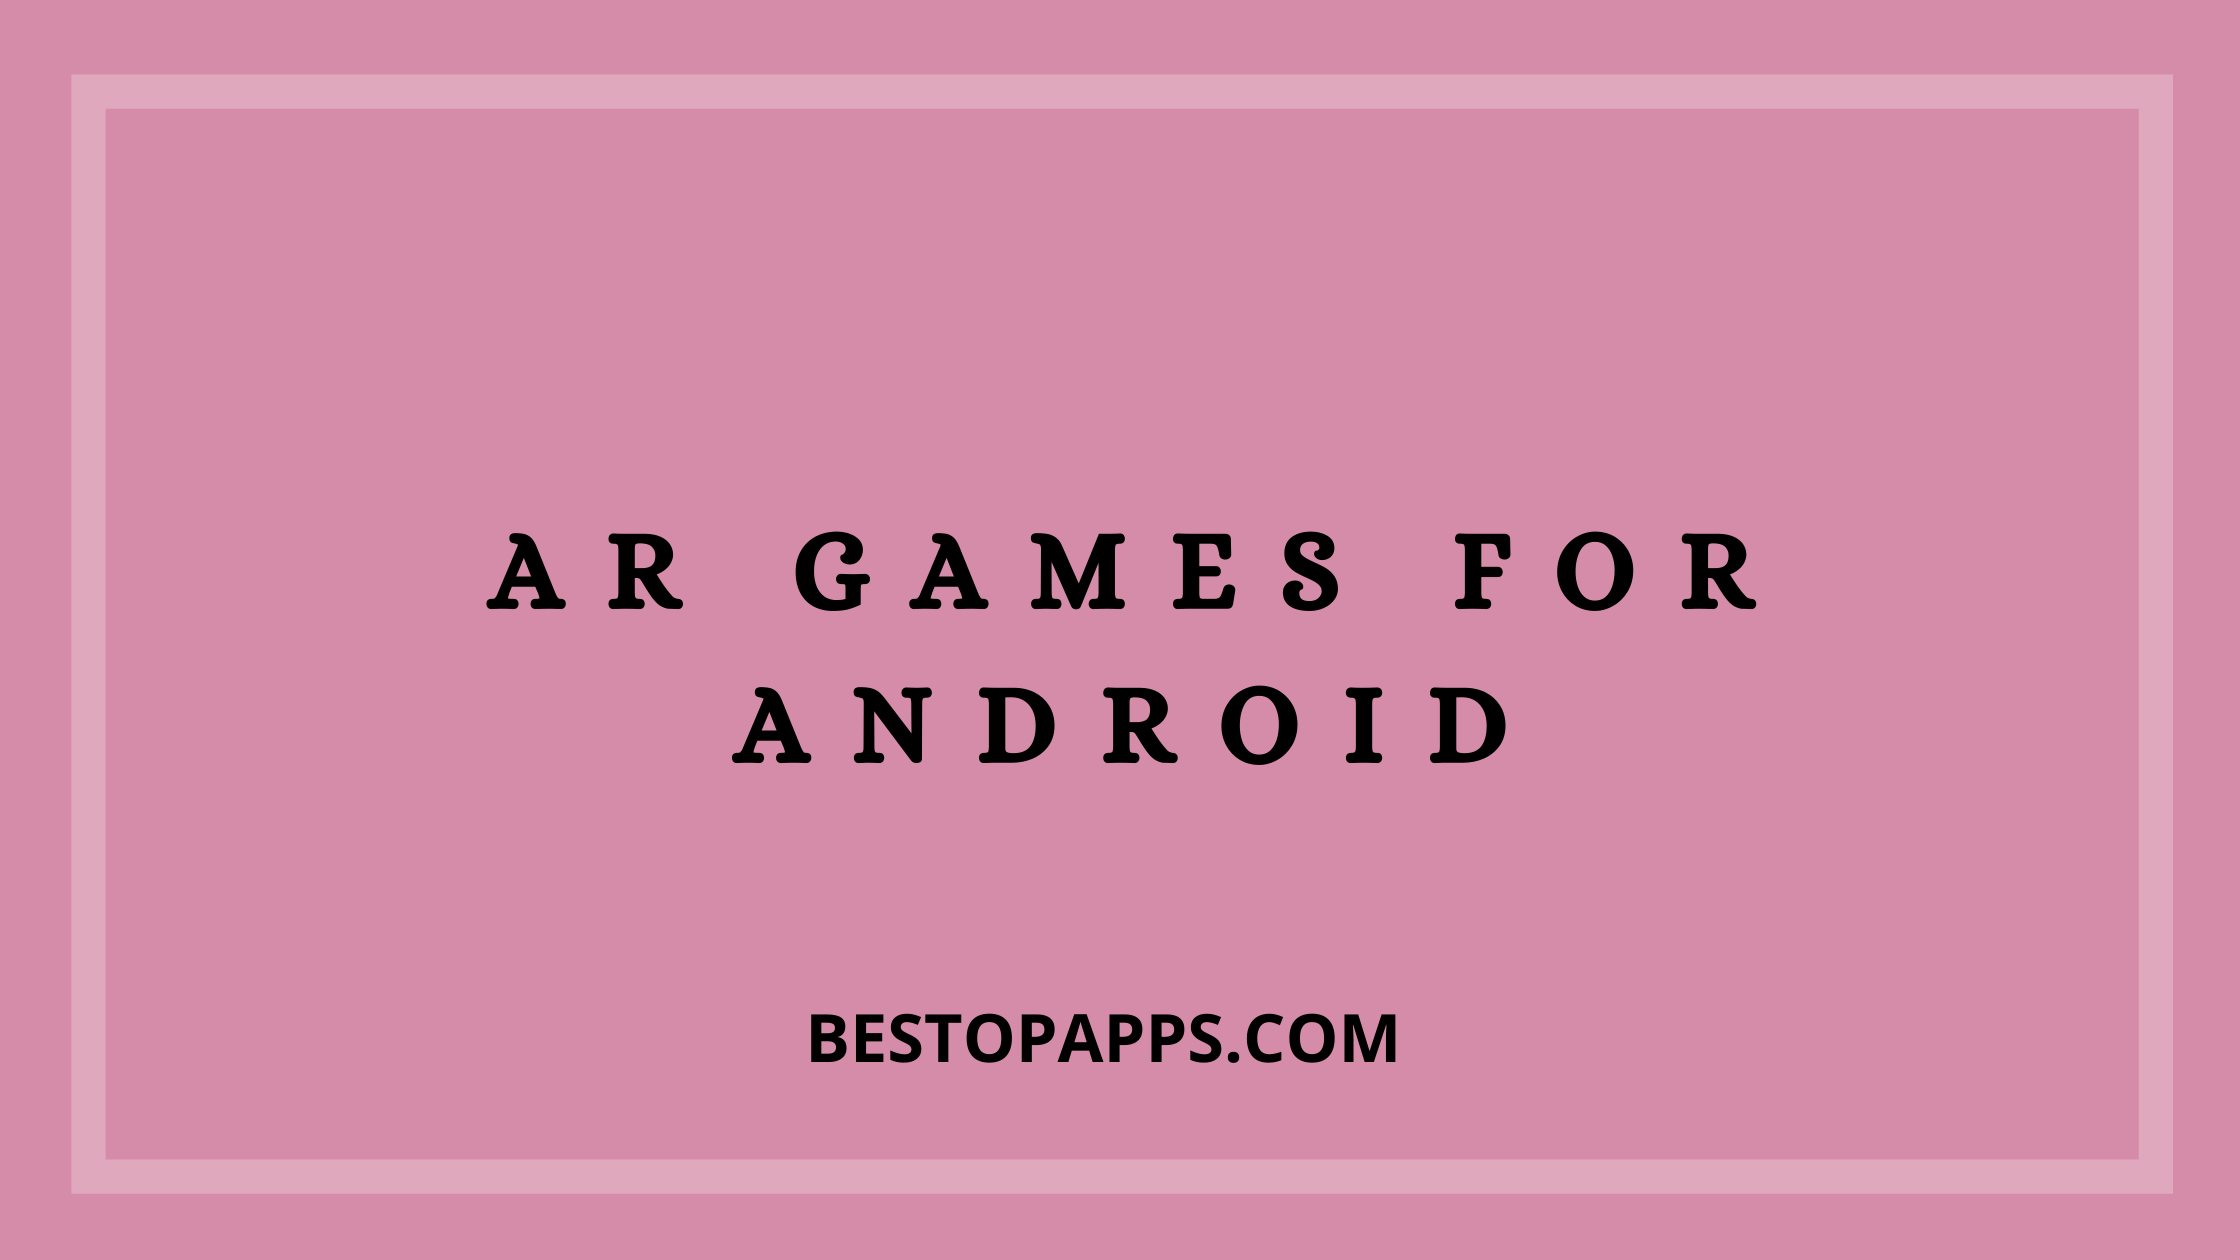 AR GAMES FOR ANDROID